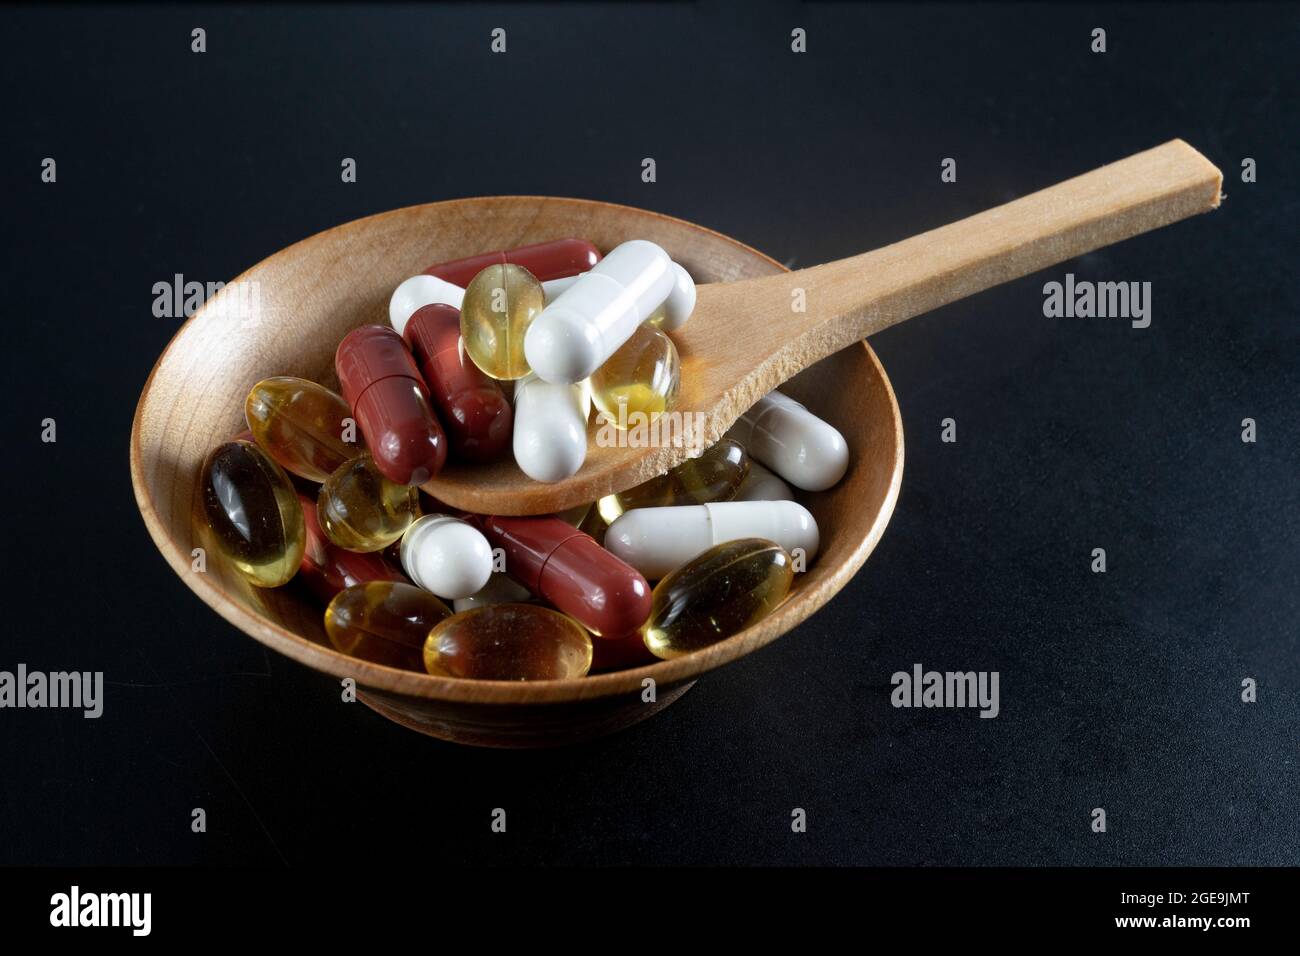 different pills and capsules on a wooden bowl with a bamboo spoon, isolated on black background. Stock Photo